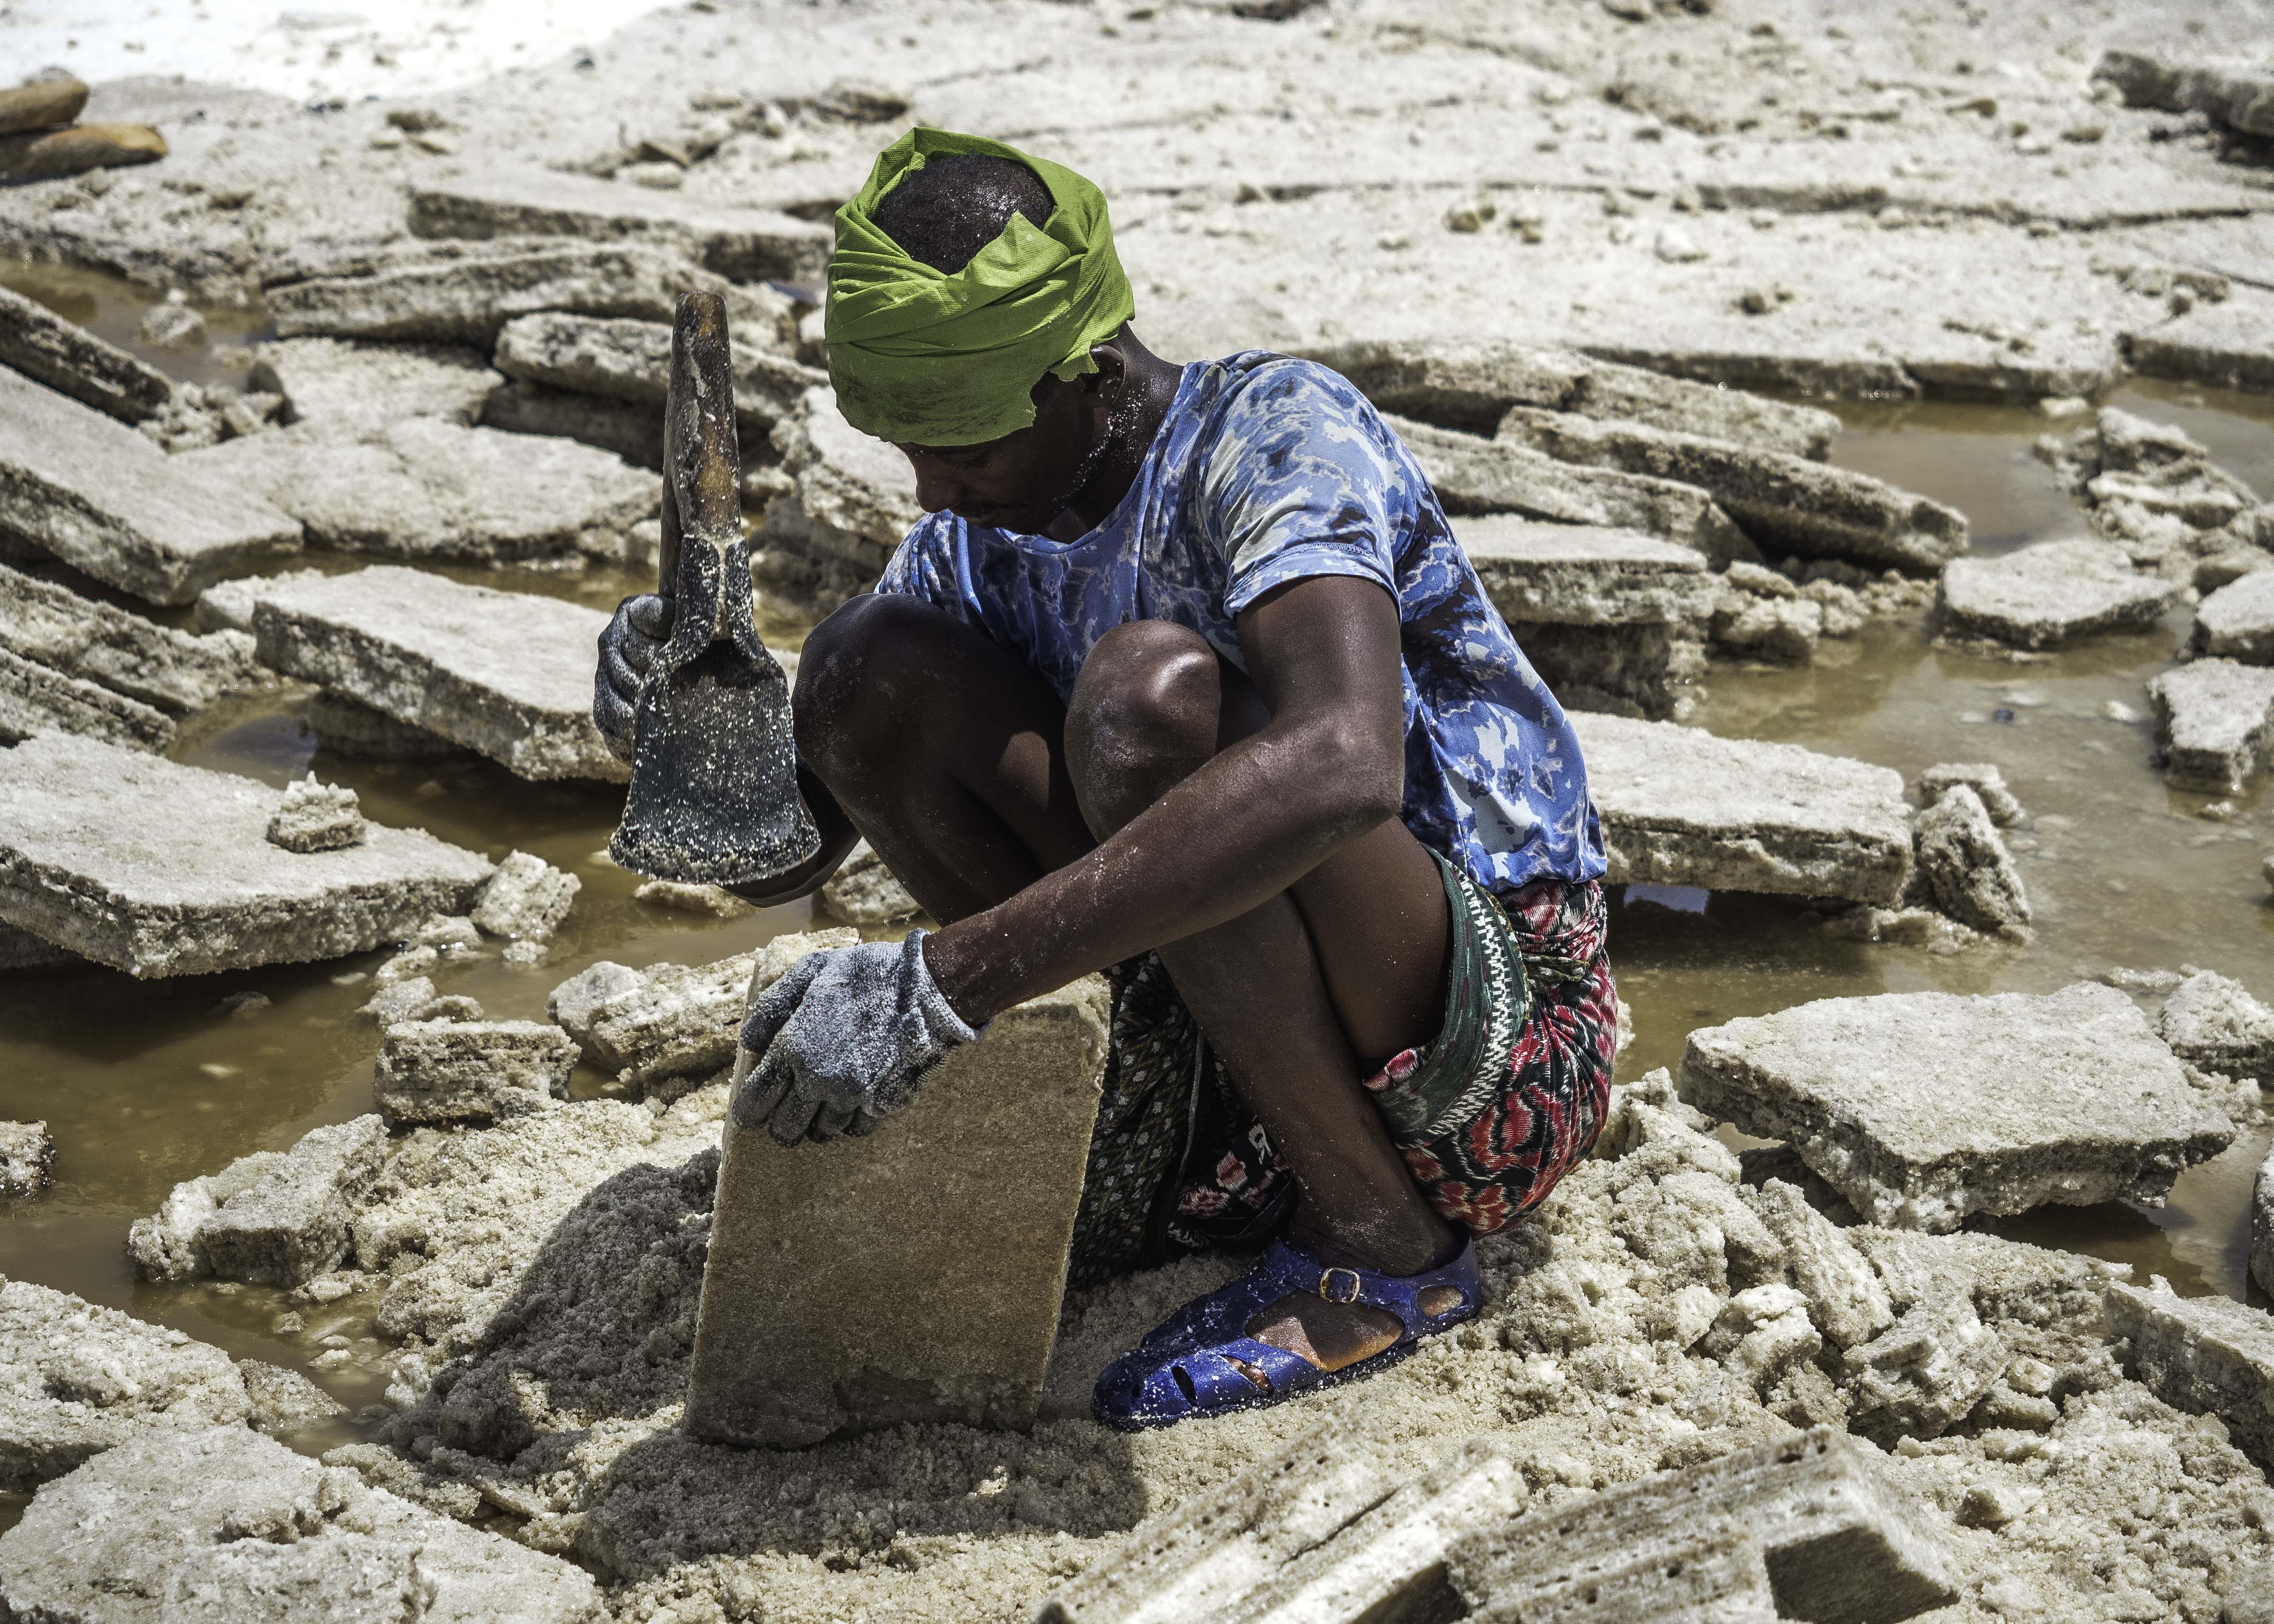 The Afar men cut slab after slab of salt into evenly shaped bricks while wearing what little protection they can afford. Drenched in salt and sweat they work tirelessly with hands and arms covered in cuts -- the pain and discomfort they overcome daily is a true testament to the strength of man.
